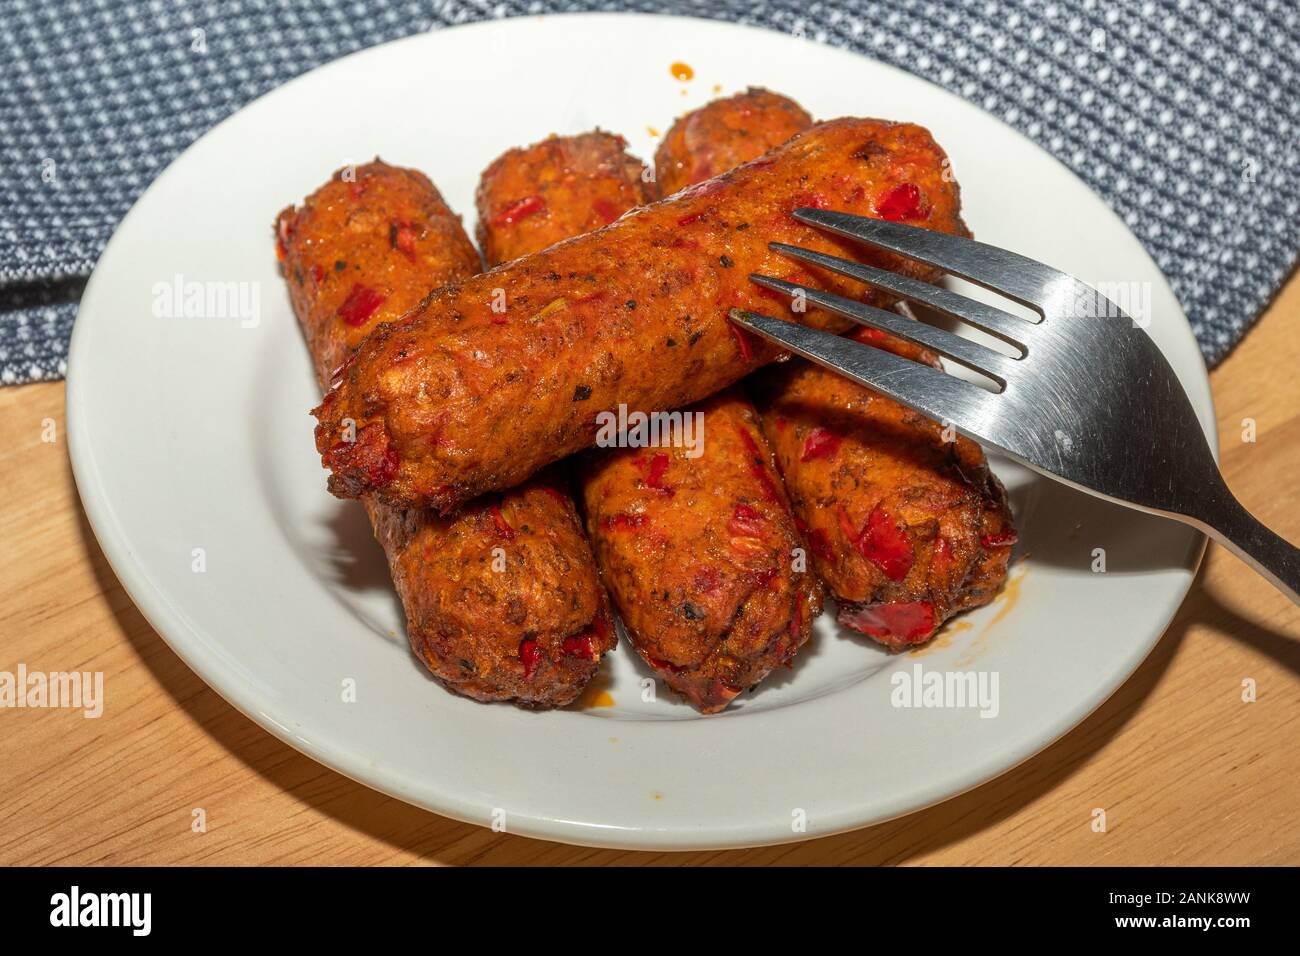 Vegetarian food - Linda McCartney's vegetarian chorizo and red pepper sausages on a plate Stock Photo